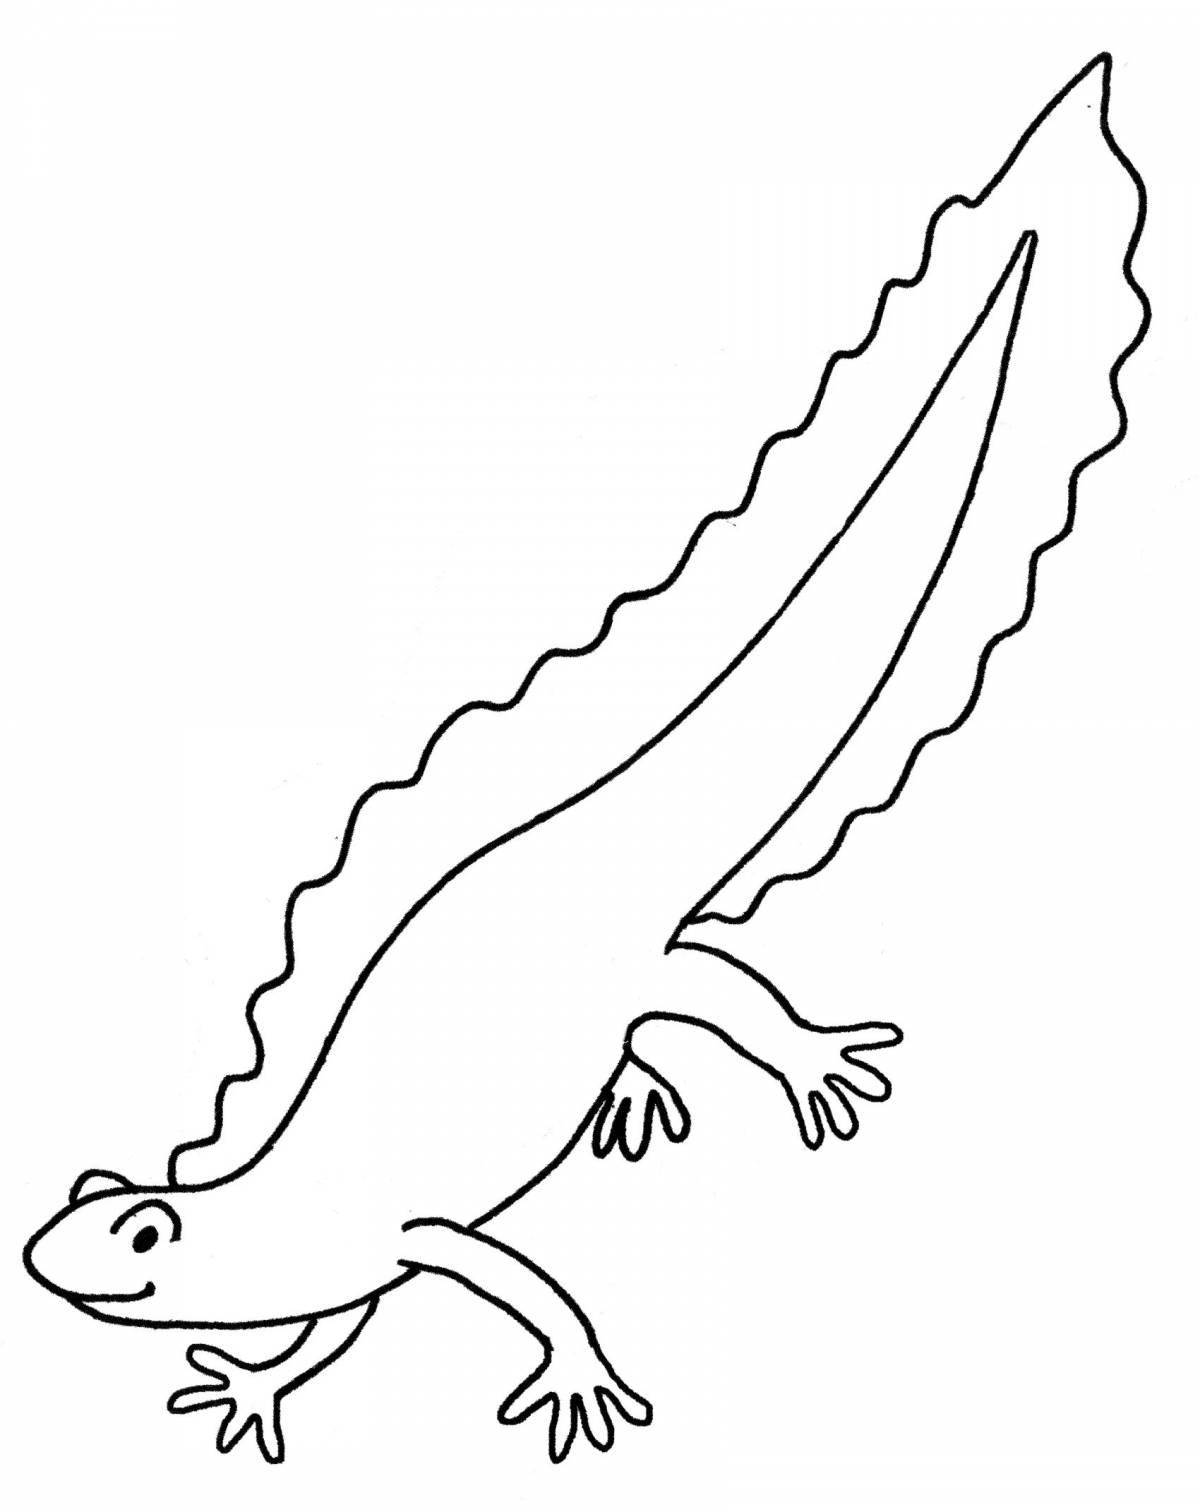 Fun common newt coloring page